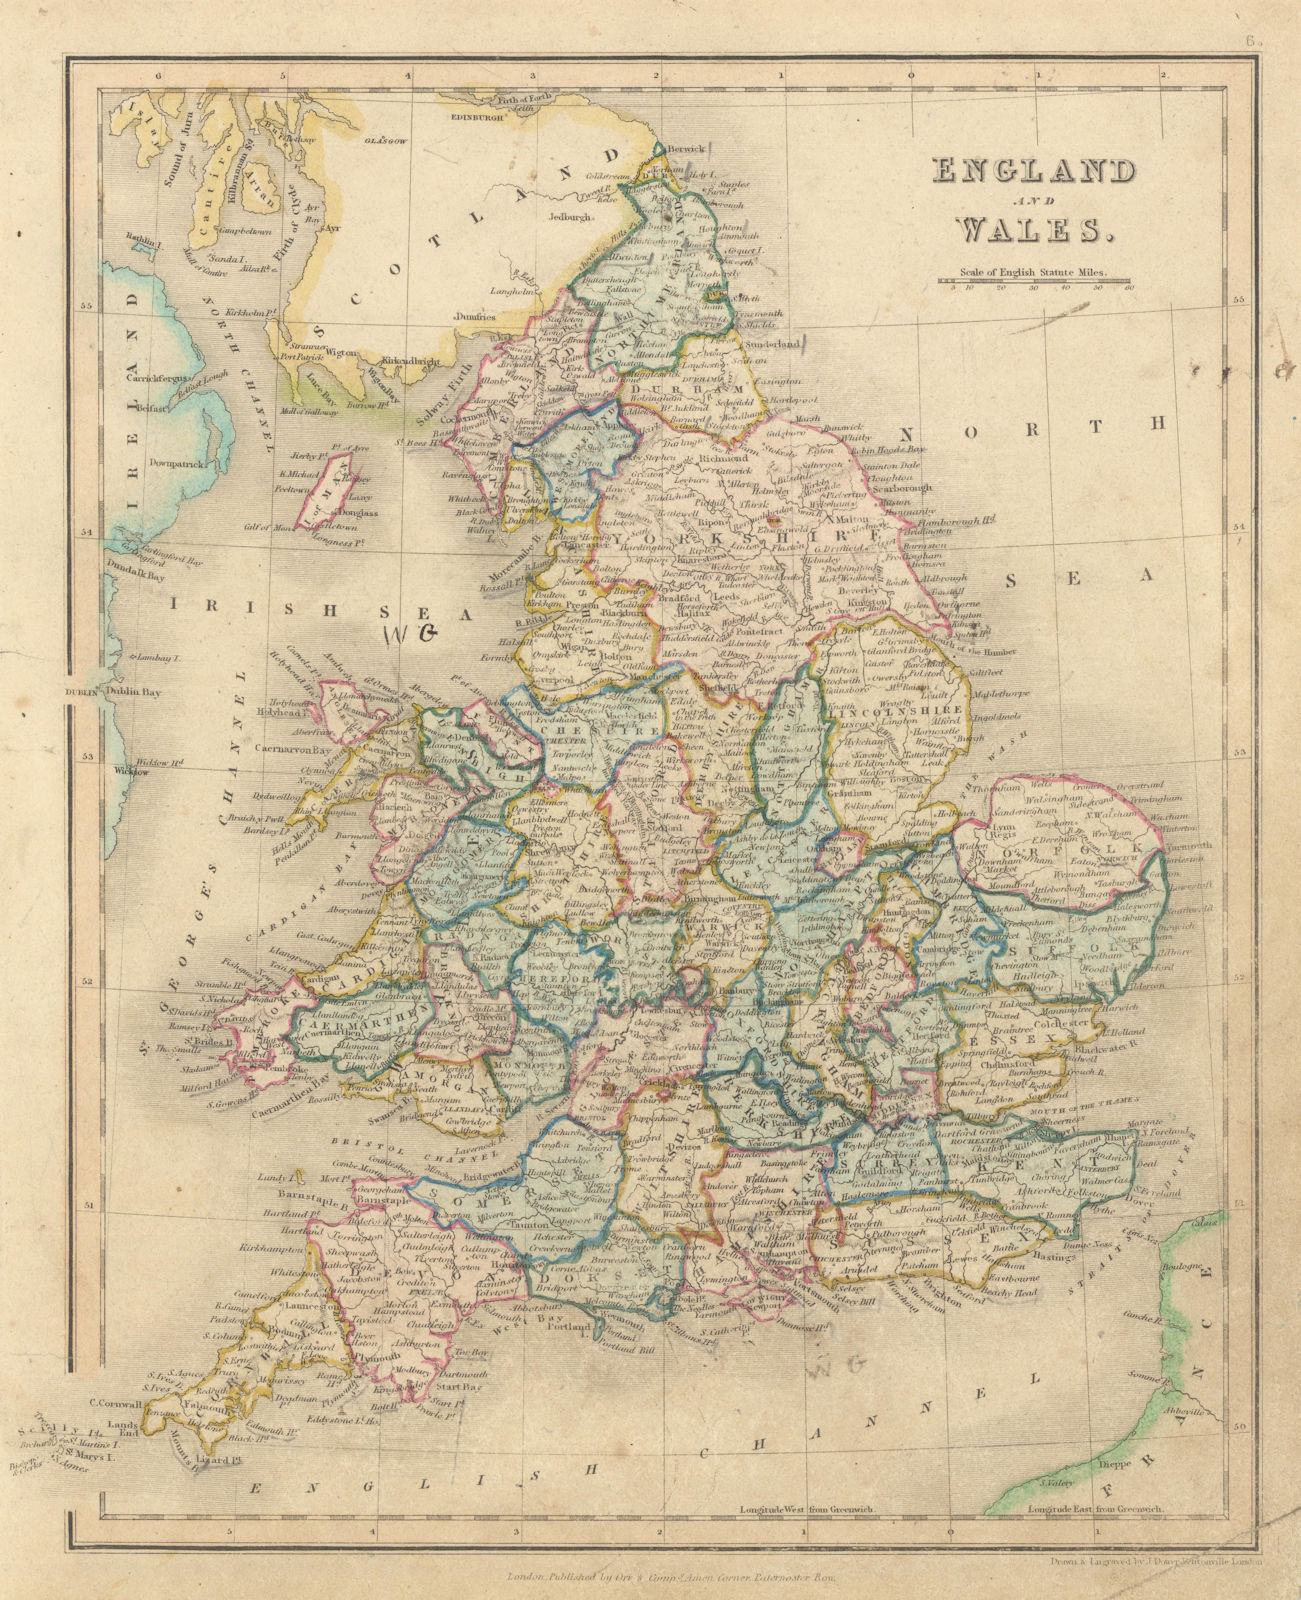 England and Wales in counties by John Dower 1845 old antique map plan chart